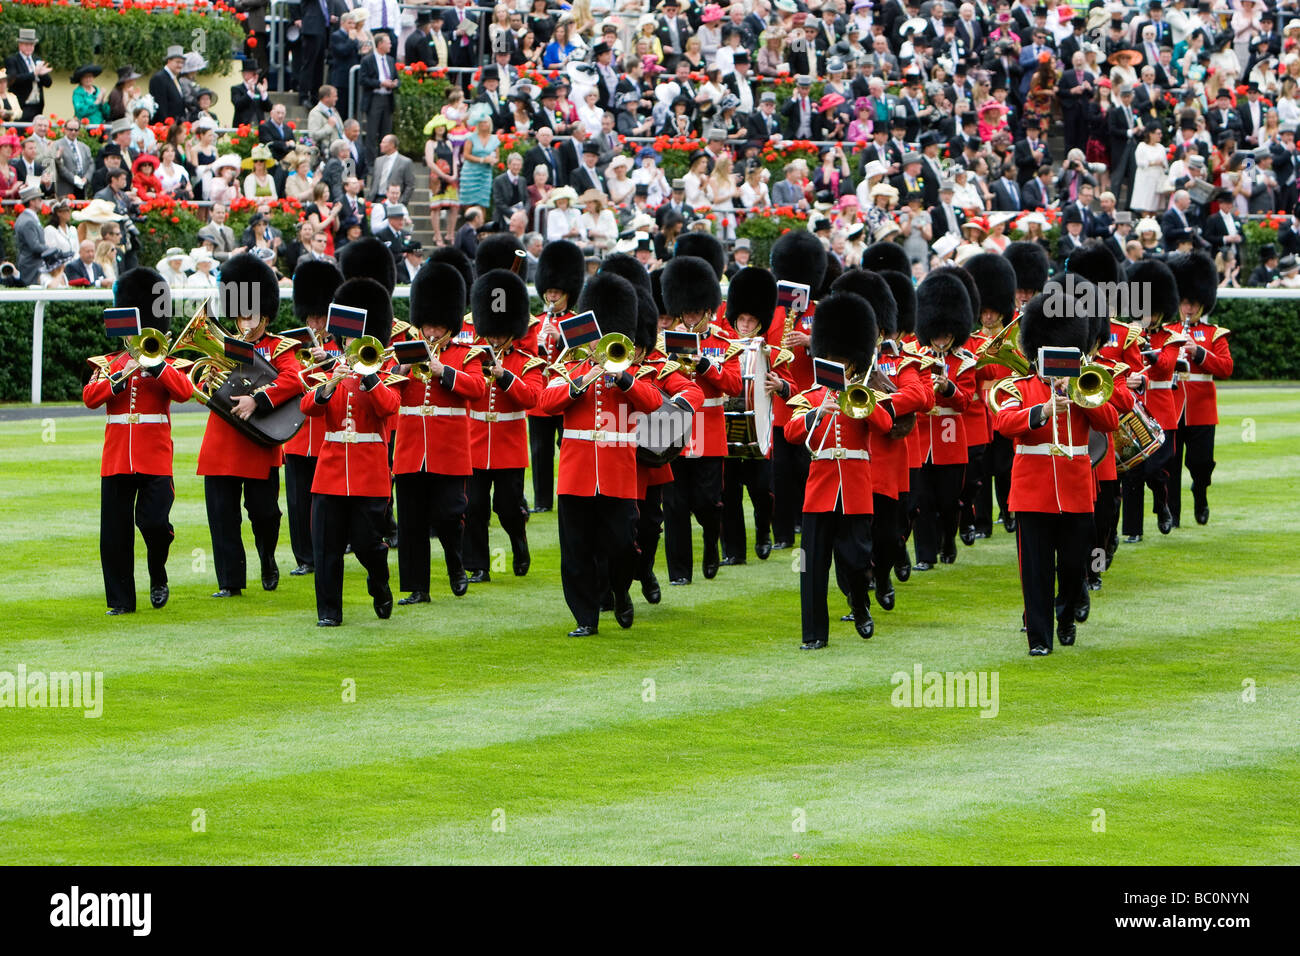 A military band from the Guards regiment play for the crowds before the strat of racing at Royal Ascot Stock Photo